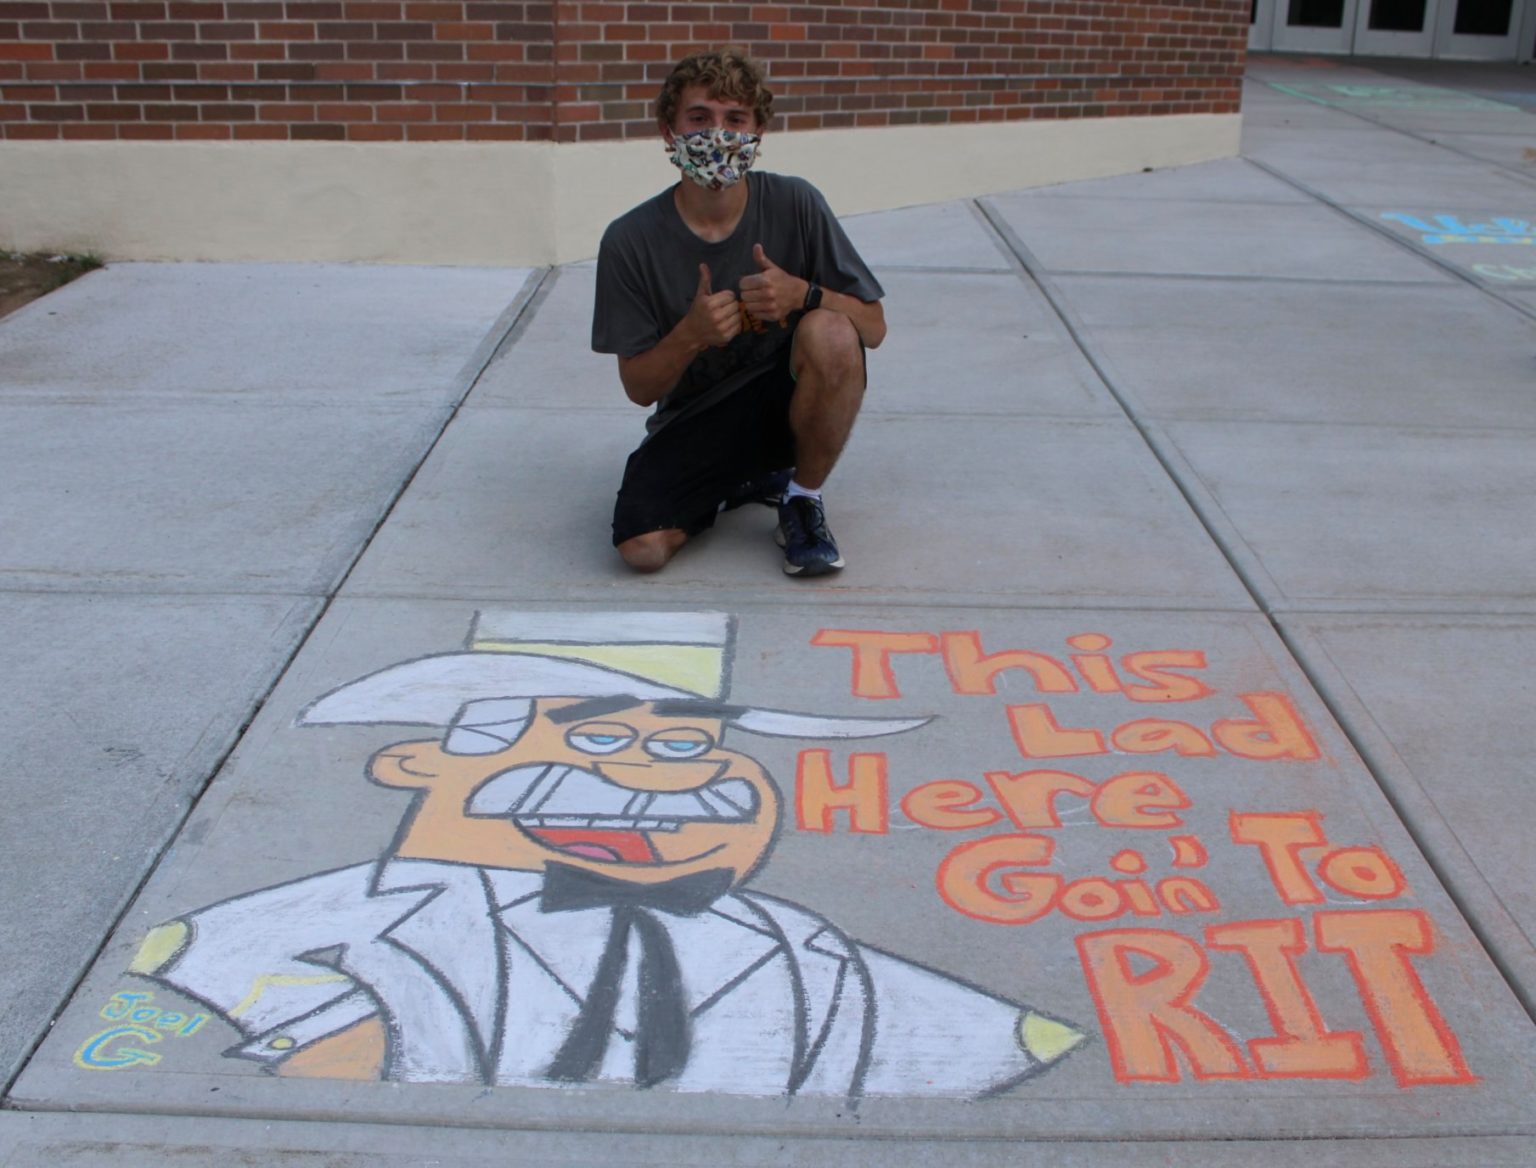 joel g sidewalk chalk drawing this lad here goin to rit from cba class of 2020 graduation